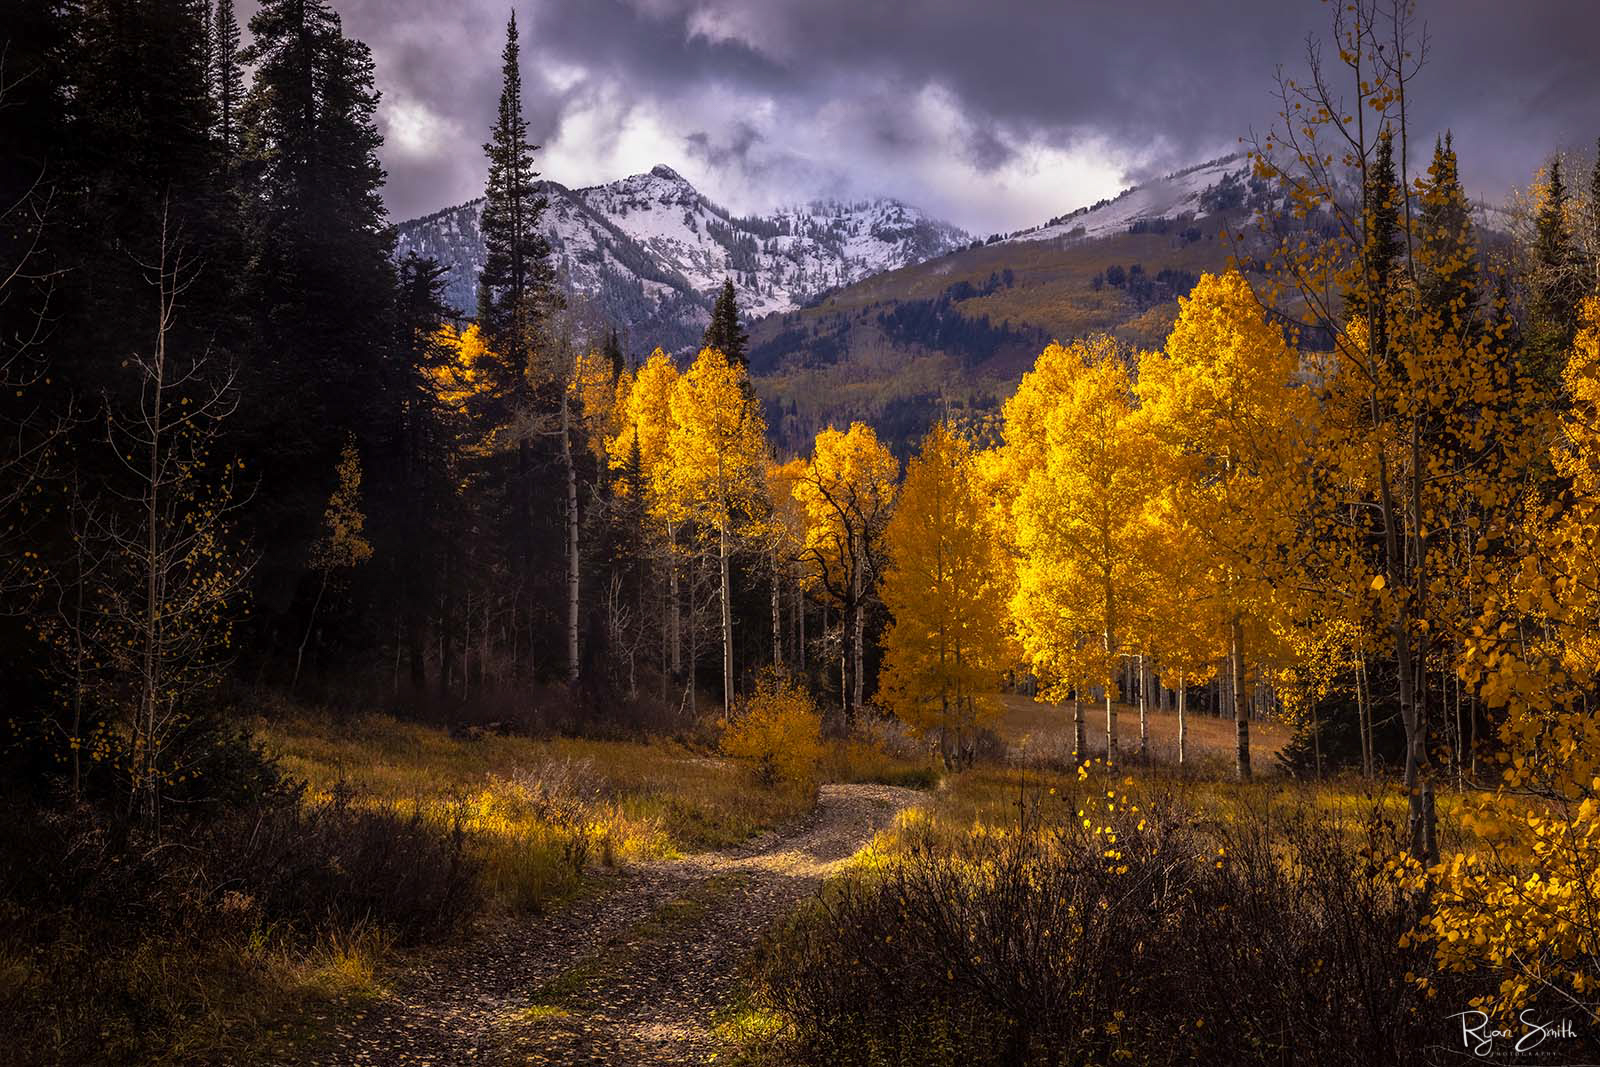 A dirt road trail covered in fall leaves leads through aspen trees with snow covered mountains in the distance with their tops shrouded in clouds. 